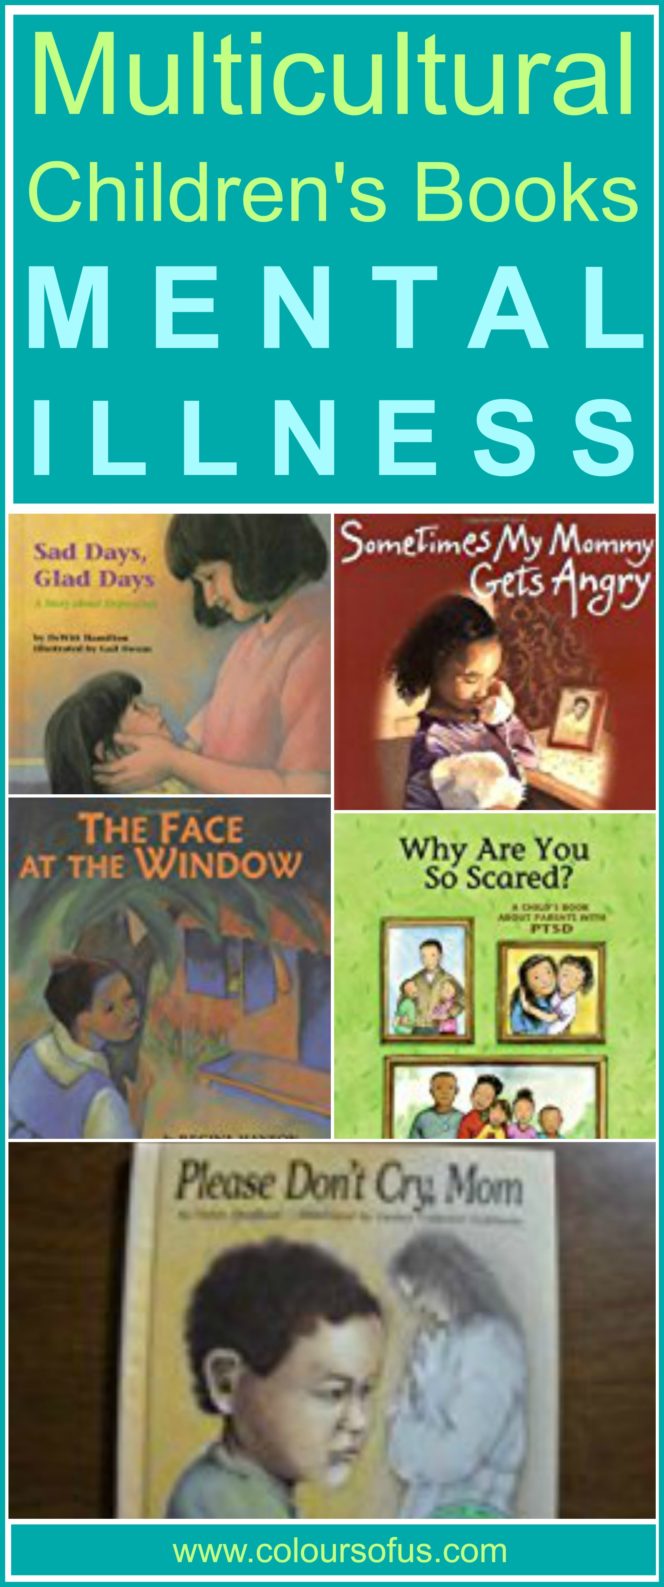 Multicultural Children's Books about Mental Illness